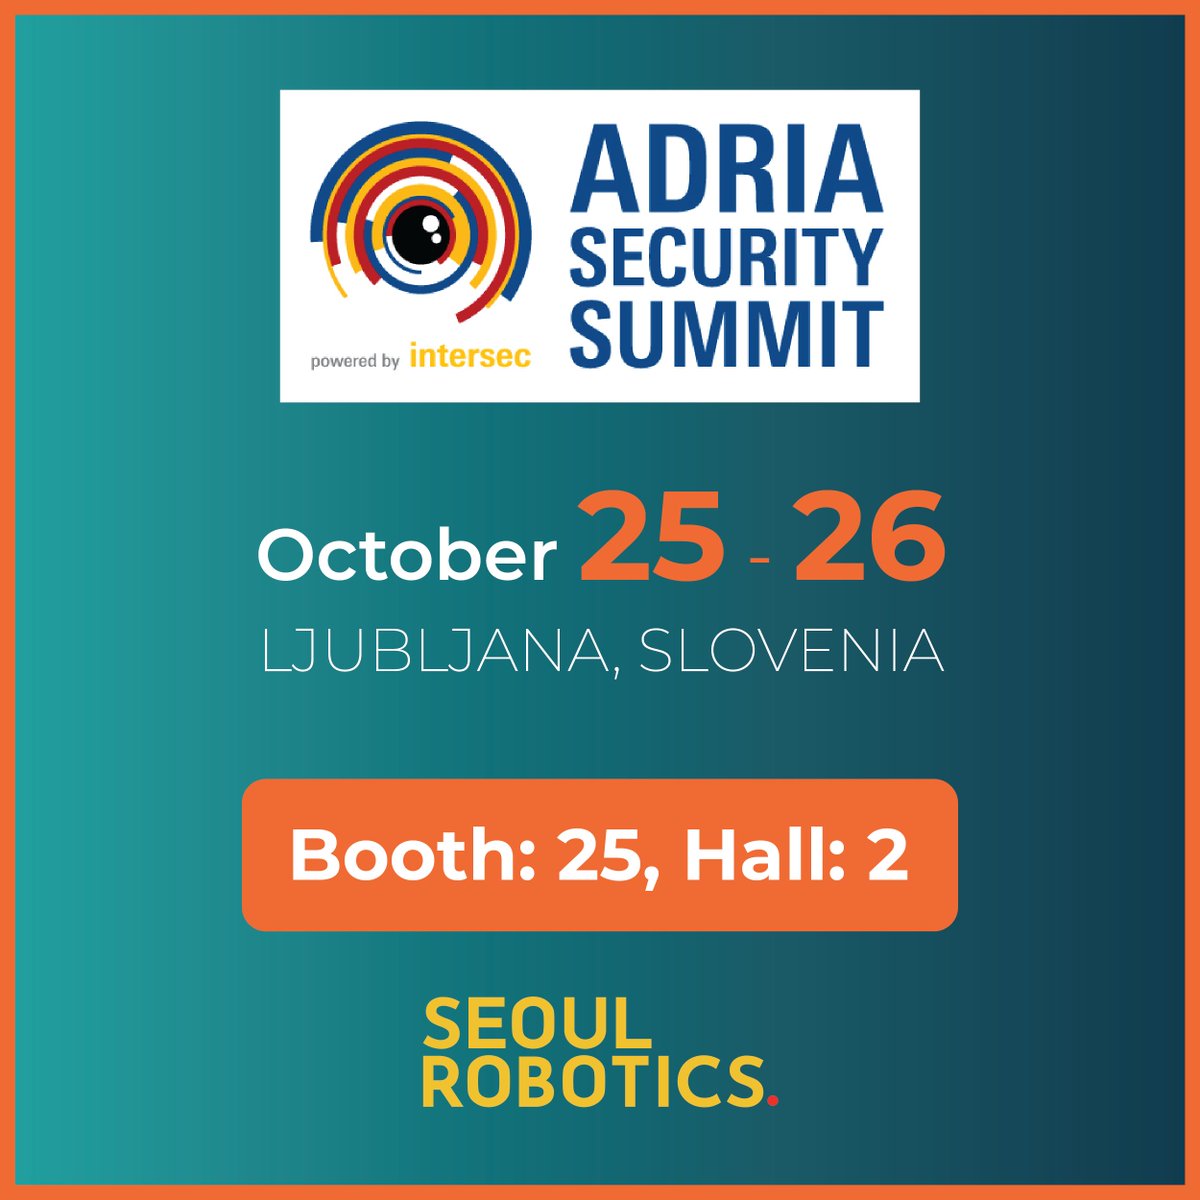 If you are attending the @AdriaSummit, visit Stelkom in booth 25, Hall 2 to see @seoulrobotics security software in action. Our intelligent 3D security solution protects critical infrastructure and sensitive areas with advanced perimeter security, real-time detection, and more.